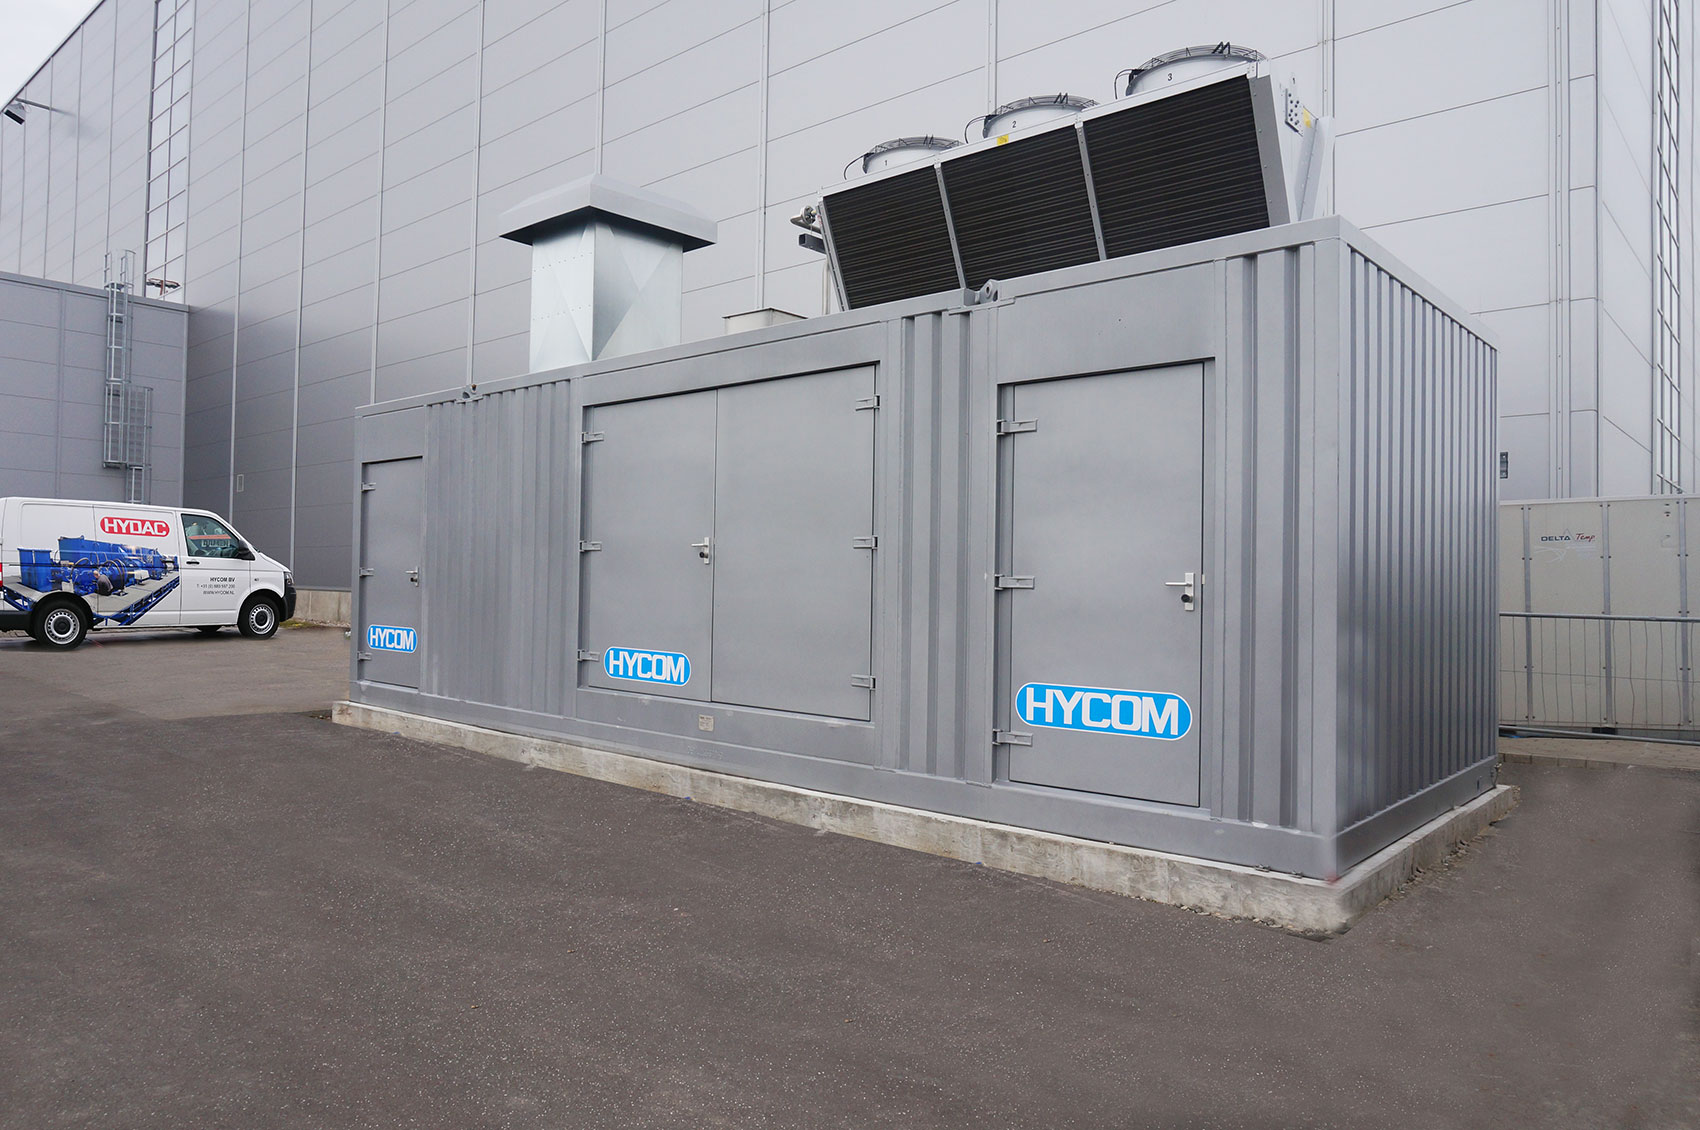 HYCOM Hydraulic power pack for assembly line in container